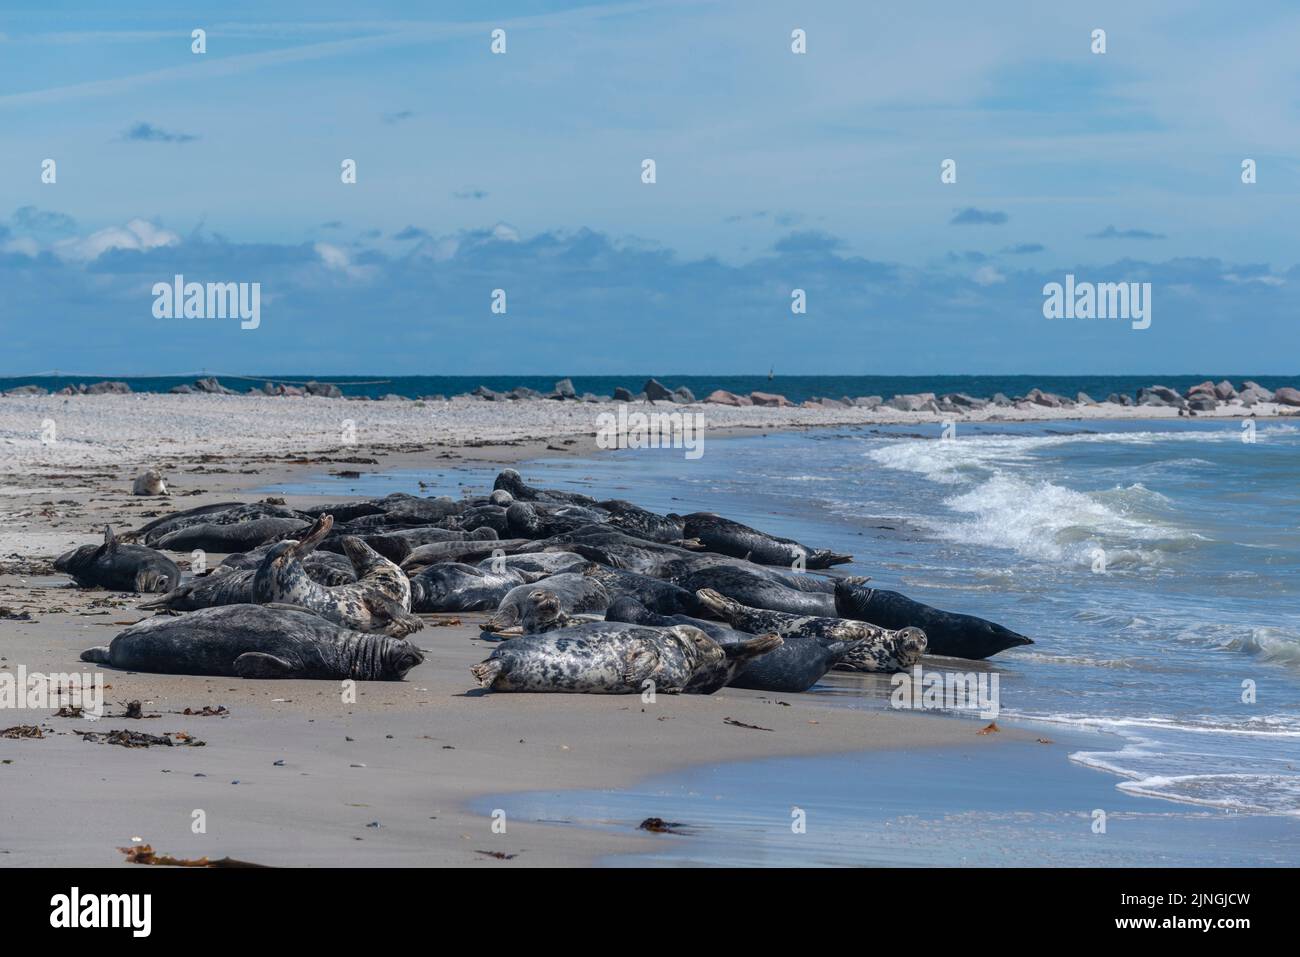 Seals, protected area, do not disturb, high seas island The Dune, part of Heligoland, district Pinneberg, Schleswig-Holstein, Northern Germany Stock Photo